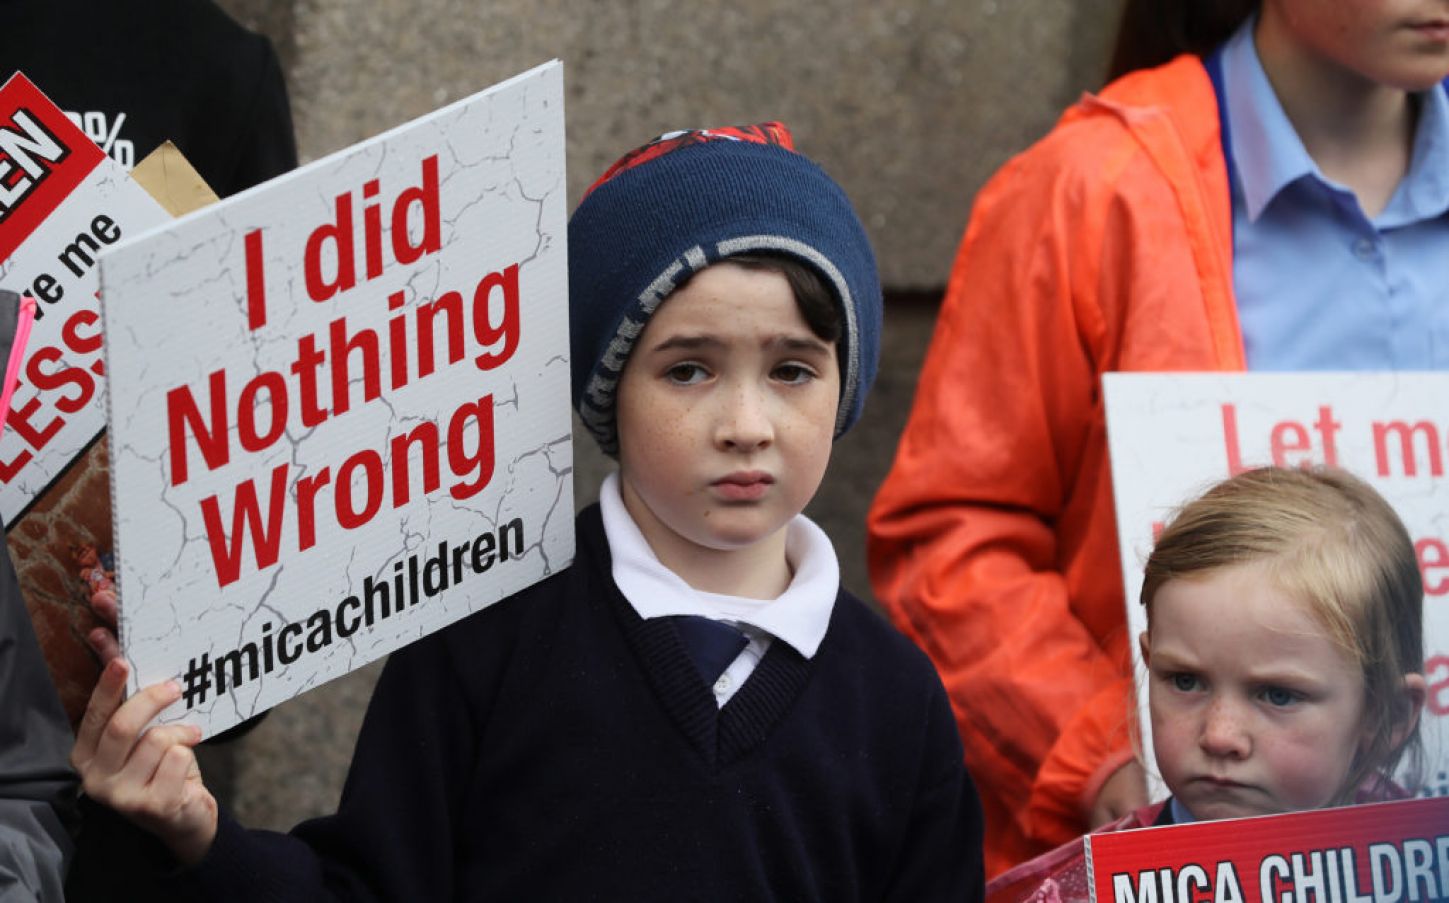 Oliver Kearns (9), From Burnfoot, And Mary-Kate Gill (5), From Moville, At The Gates Of The Dáil In Dublin, As Children From Across Co Donegal Protested To Highlight The Ongoing Mica Crisis. Photo: Pa